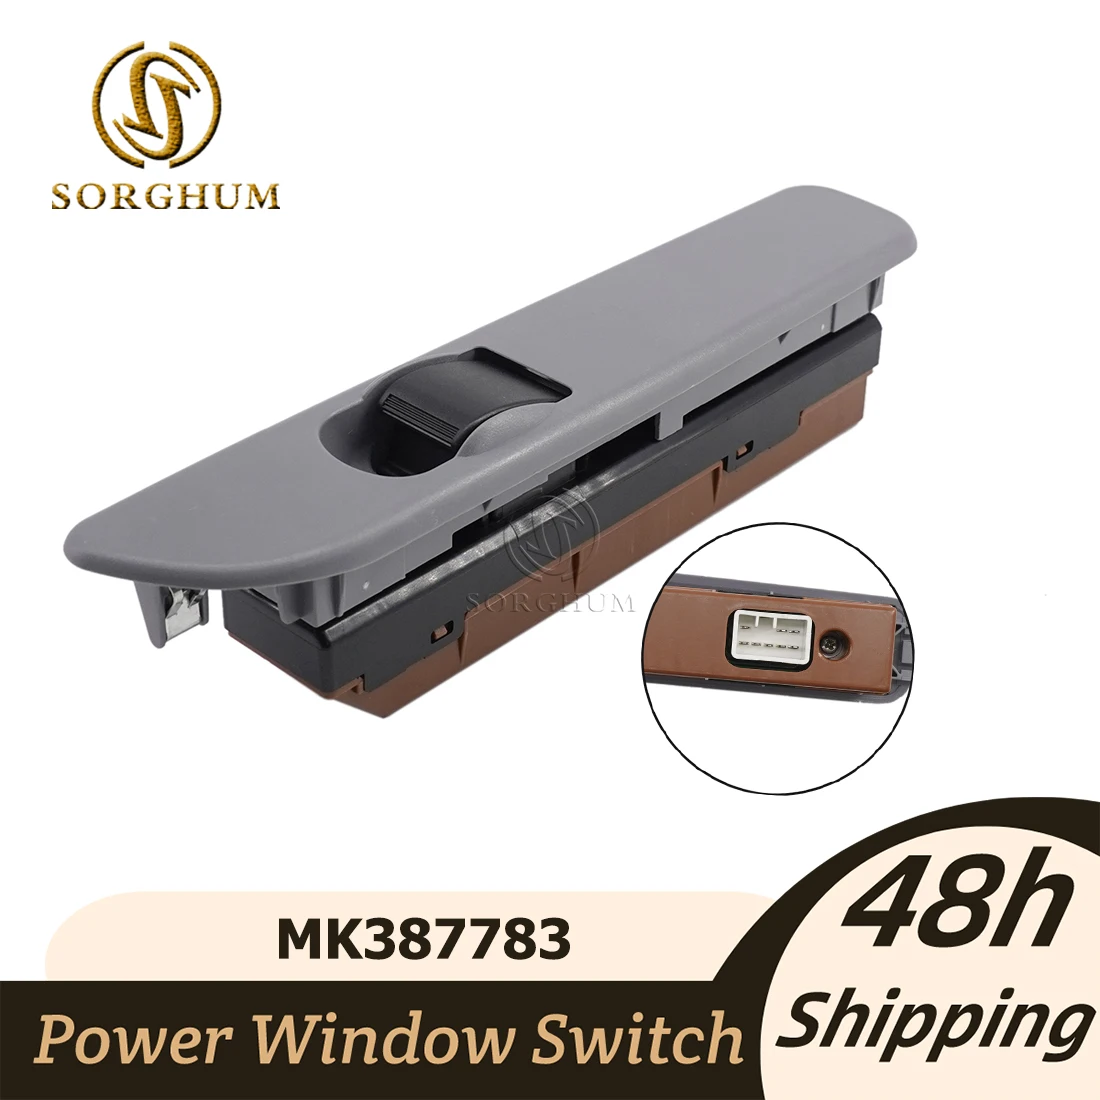 

Sorghum Fits for Mitsubishi Fuso Canter 2005 2006 2007 FB83 Electric Power Master Electric Window Switch Button Lifter MK387783